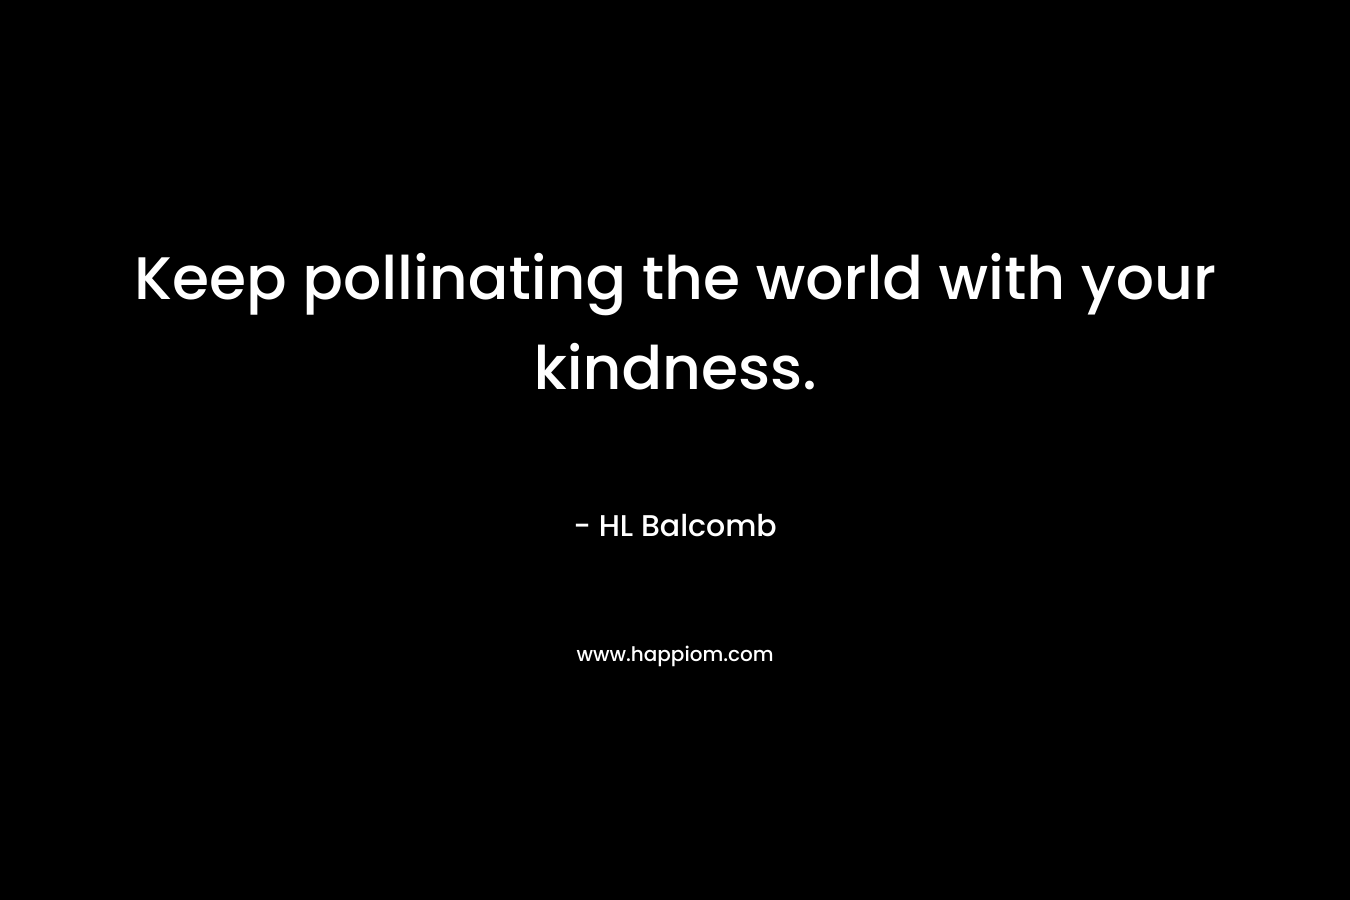 Keep pollinating the world with your kindness. – HL Balcomb